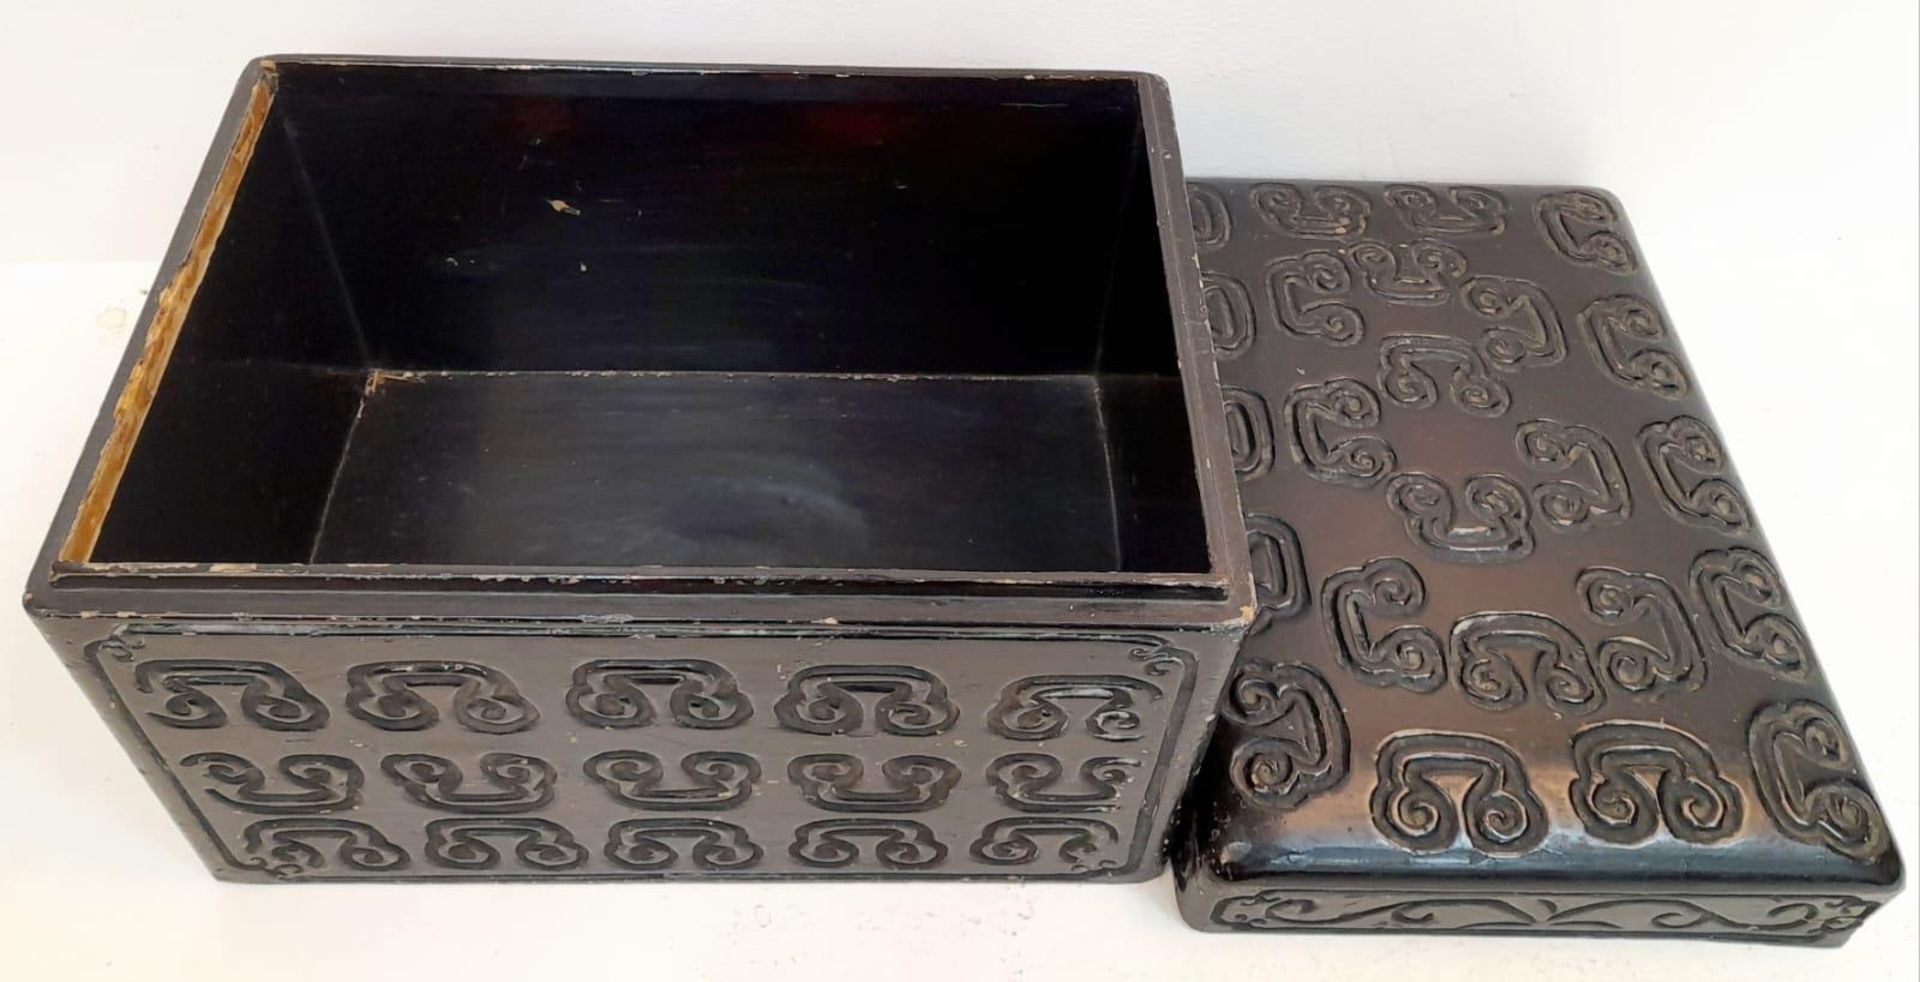 A Fascinating and Wonderful Antique Chinese Large Lacquered Box - 18th century, possibly earlier. - Bild 5 aus 7